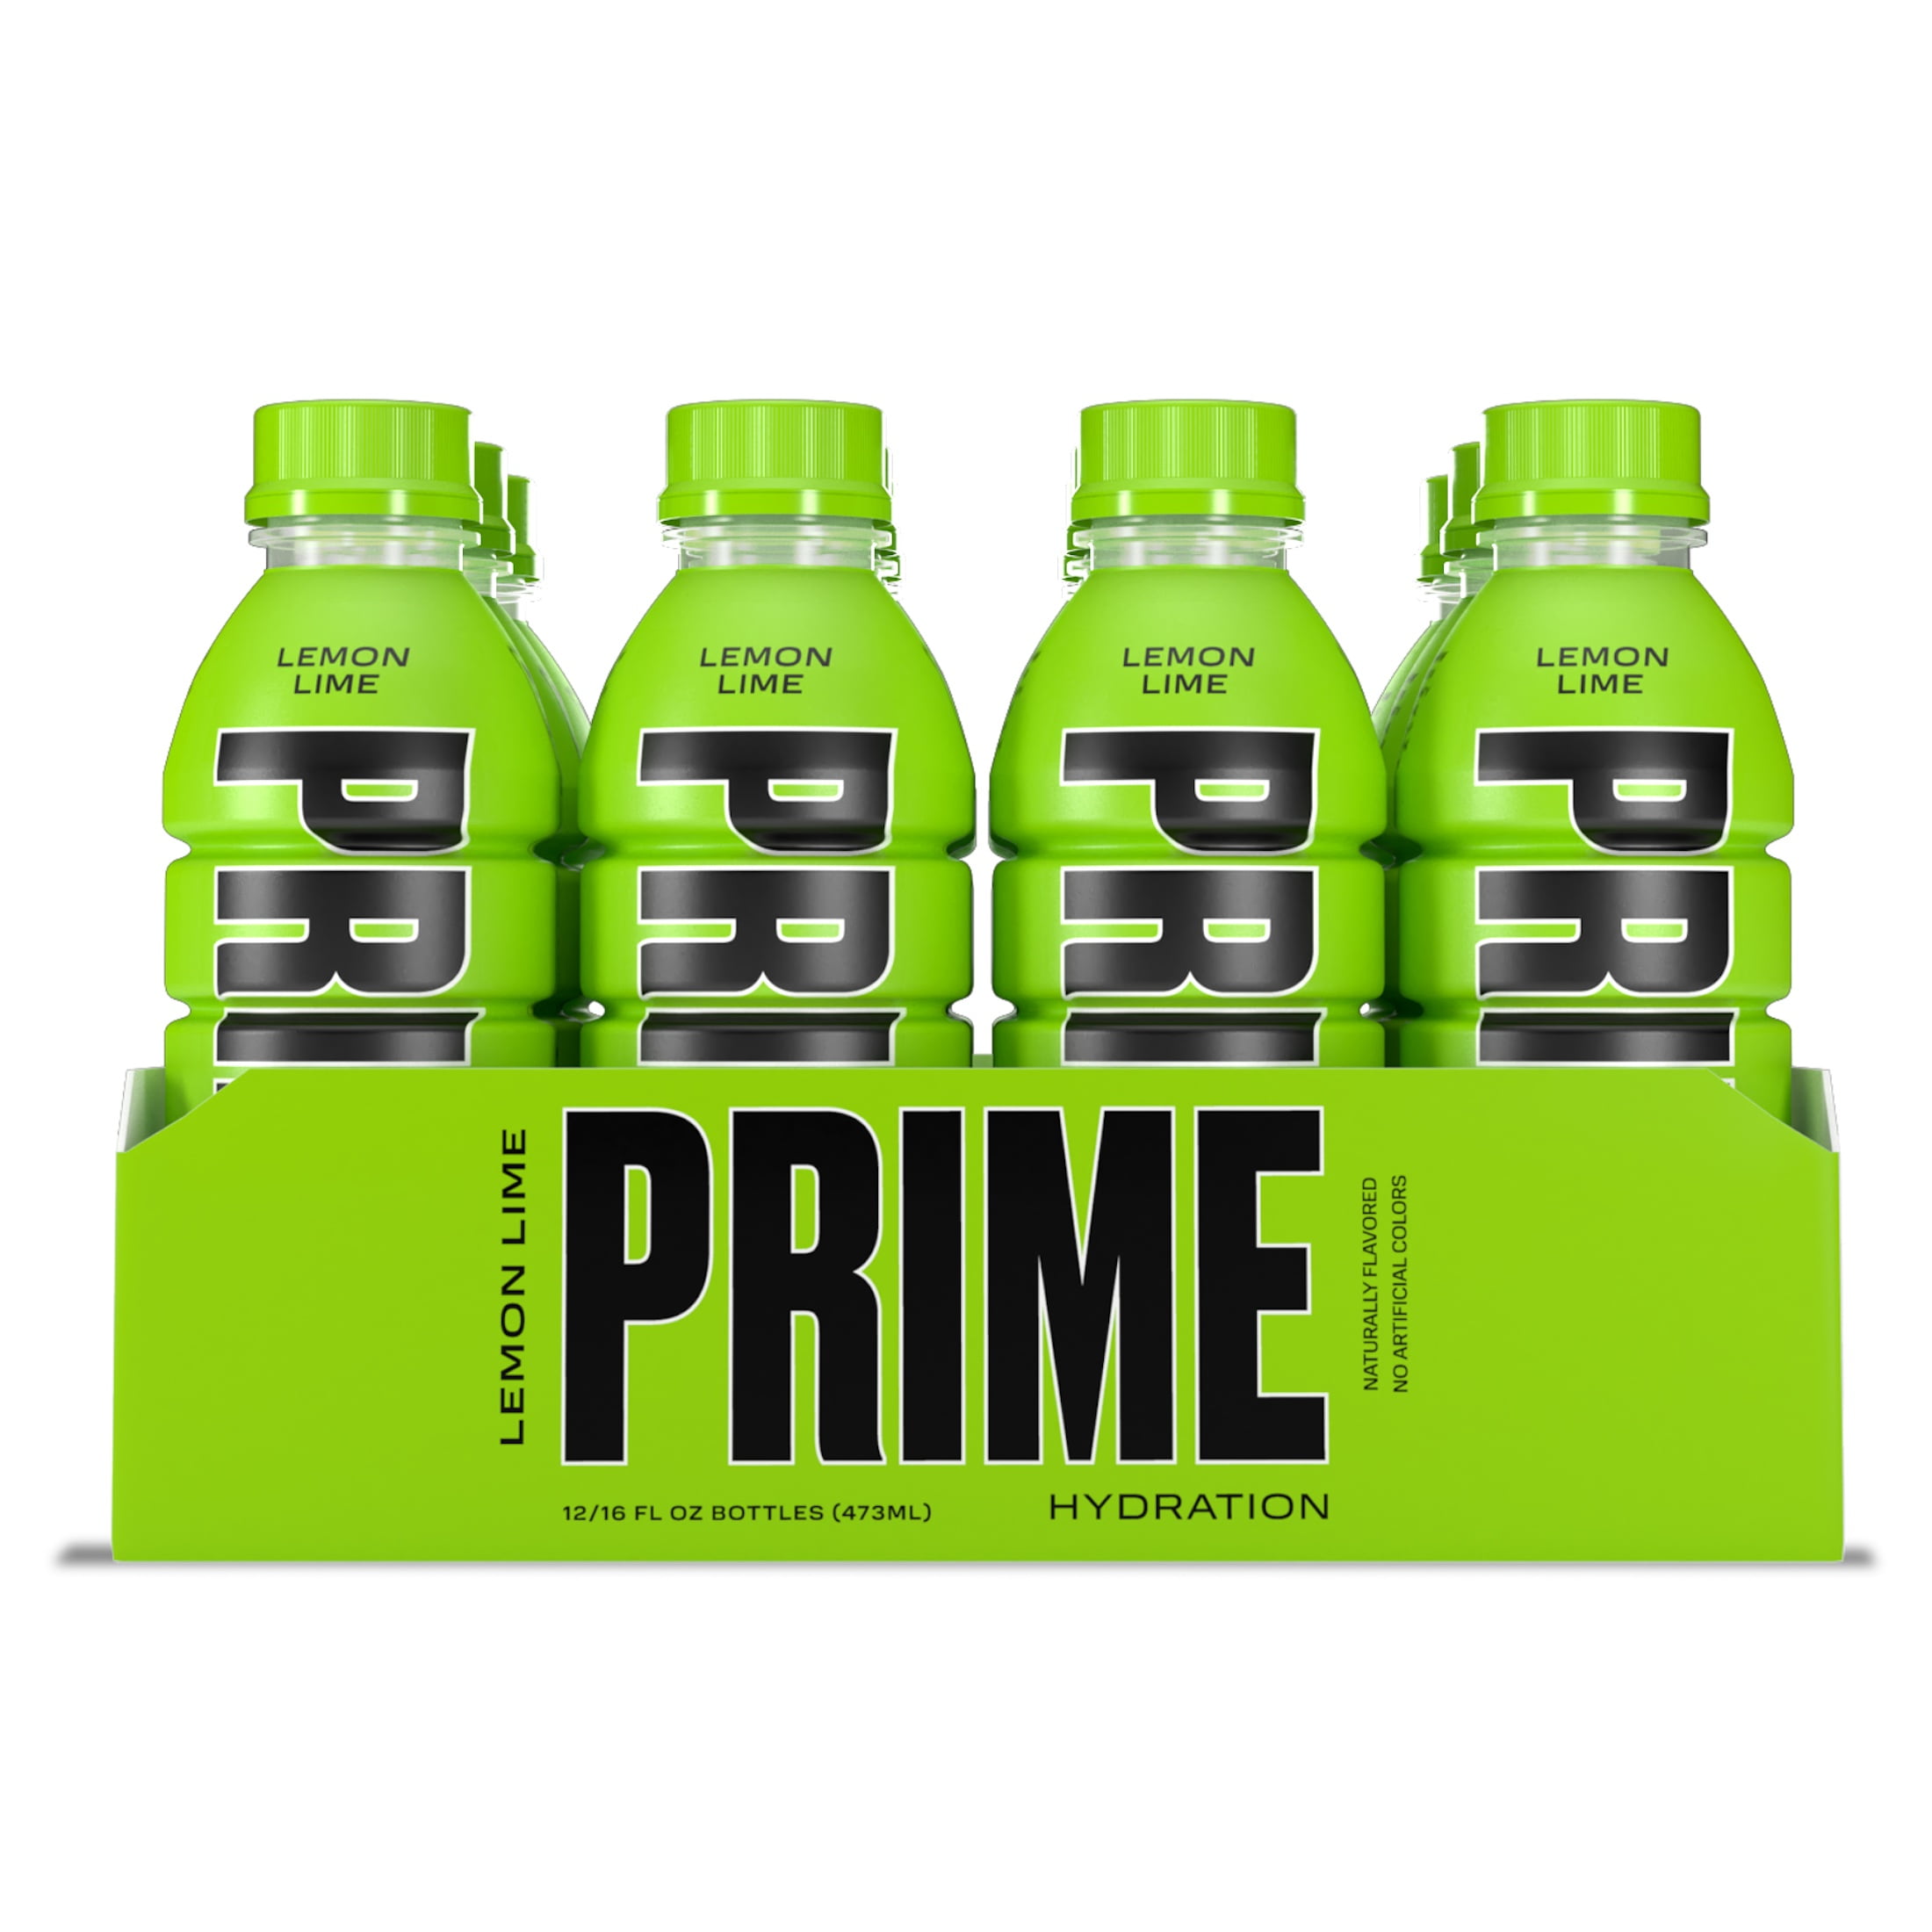 Prime Tropical Punch Hydration Drink Multipack, 12 x 500 ml